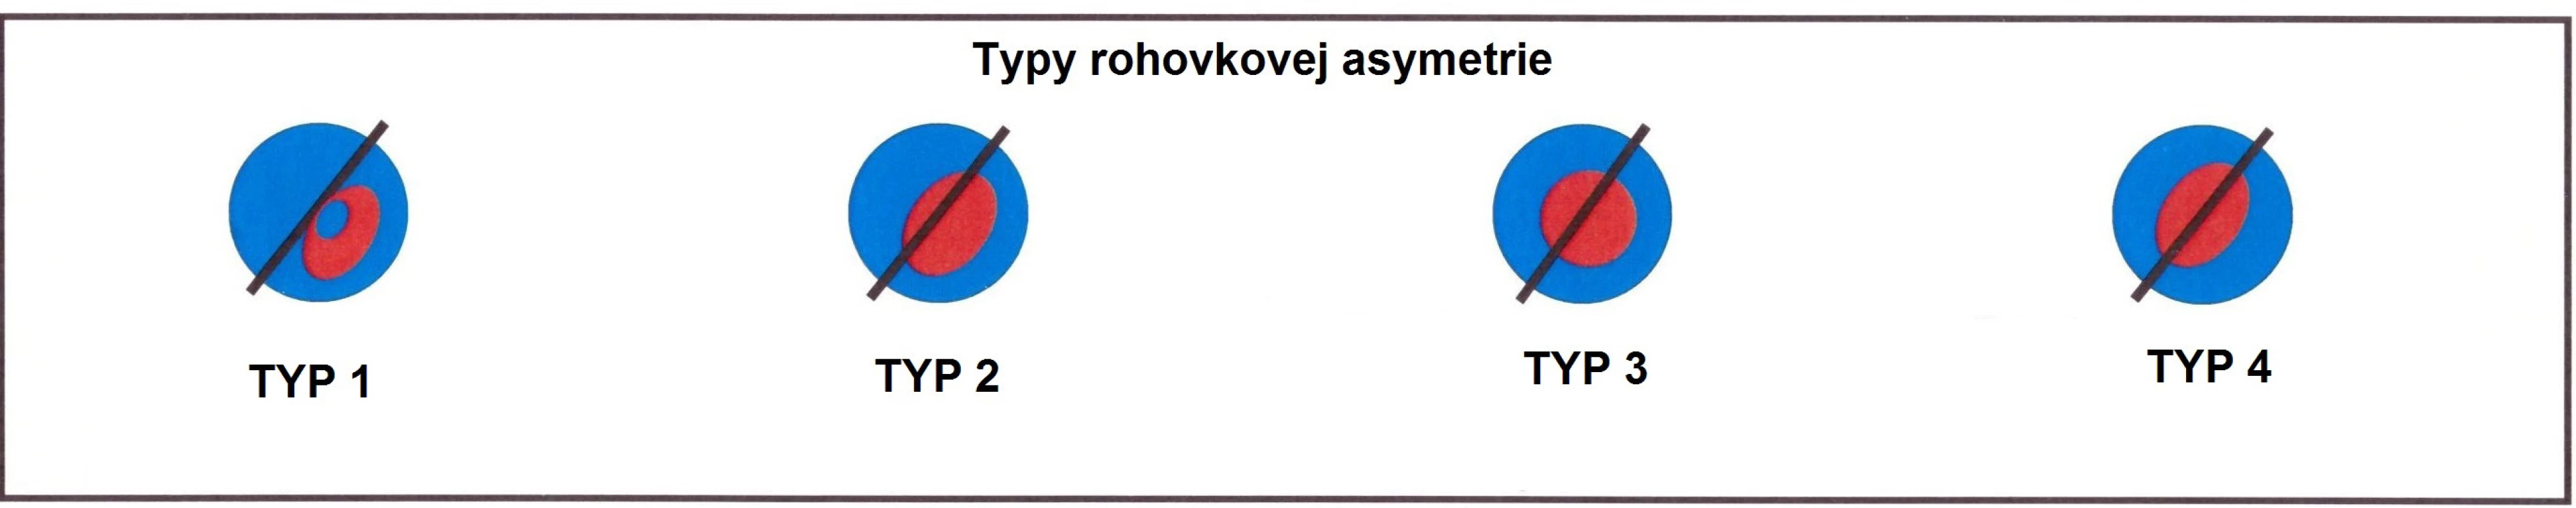 Types of corneal assymetry used for Keraring calculations